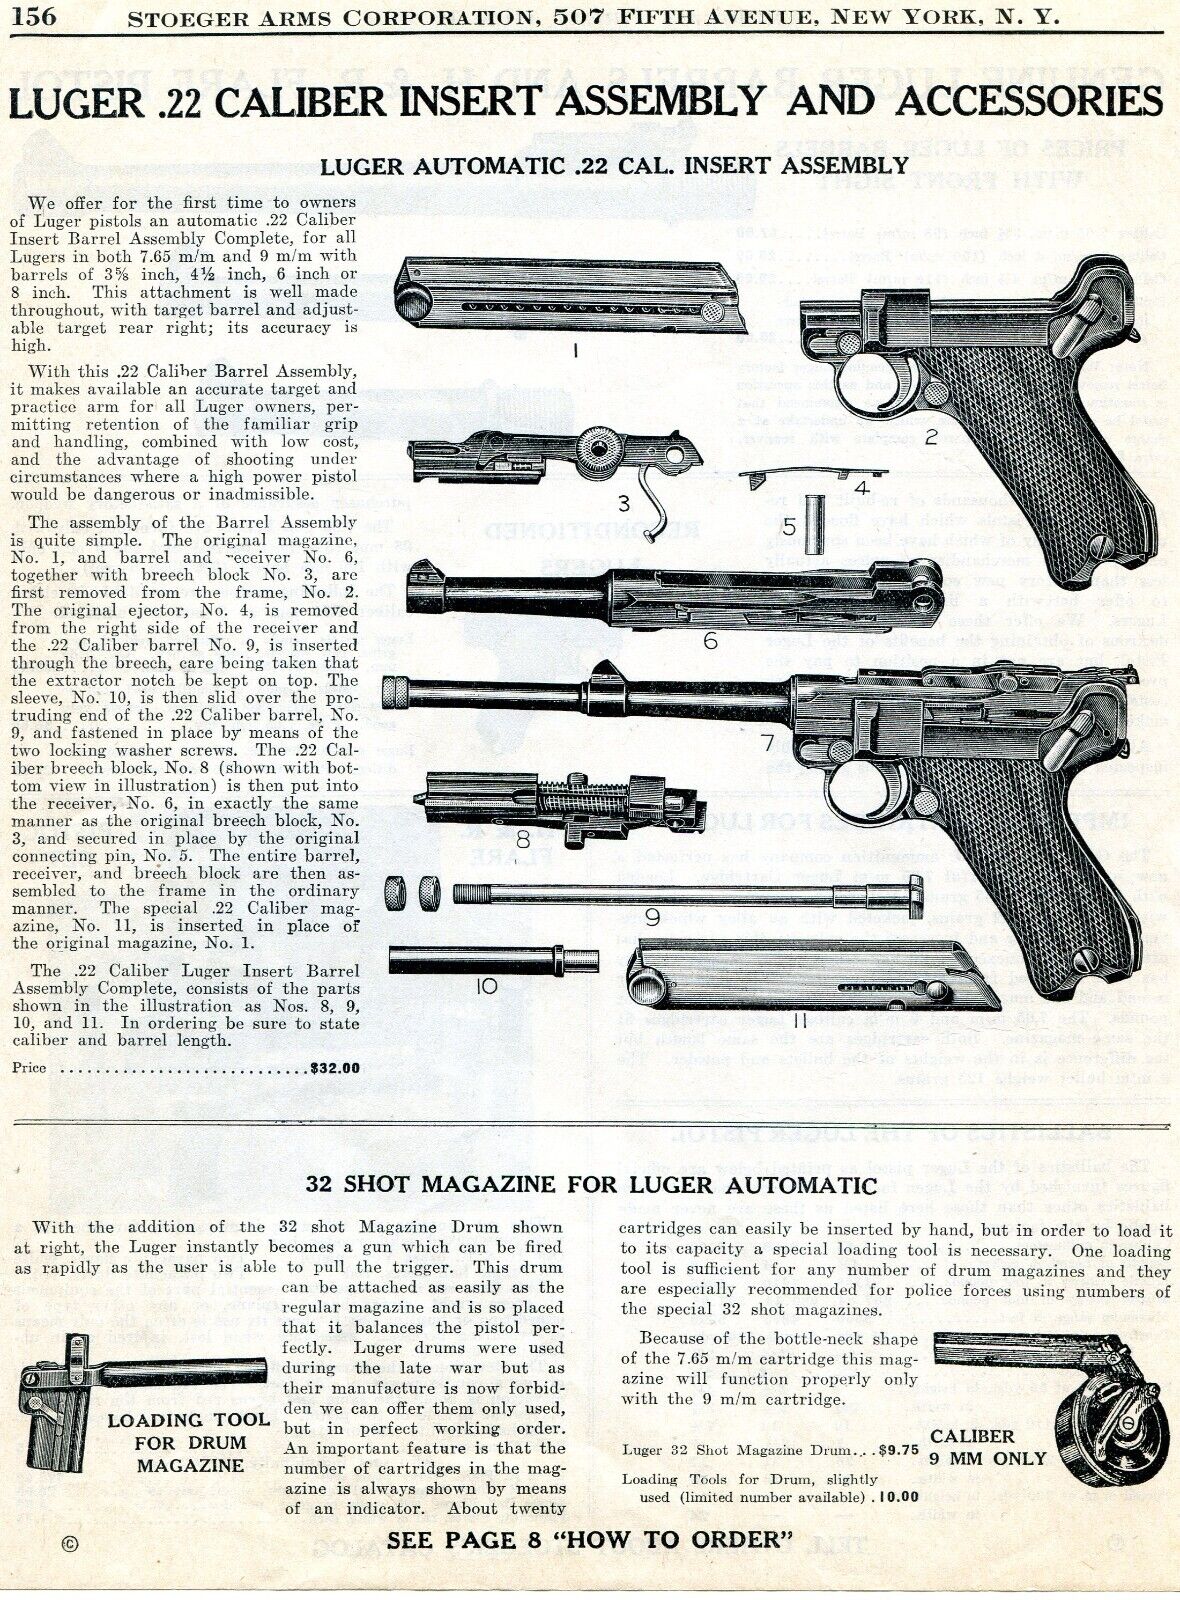 1939 Print Ad of Luger 22 Automatic Pistol Insert Assembly & 32 Shot Magazine